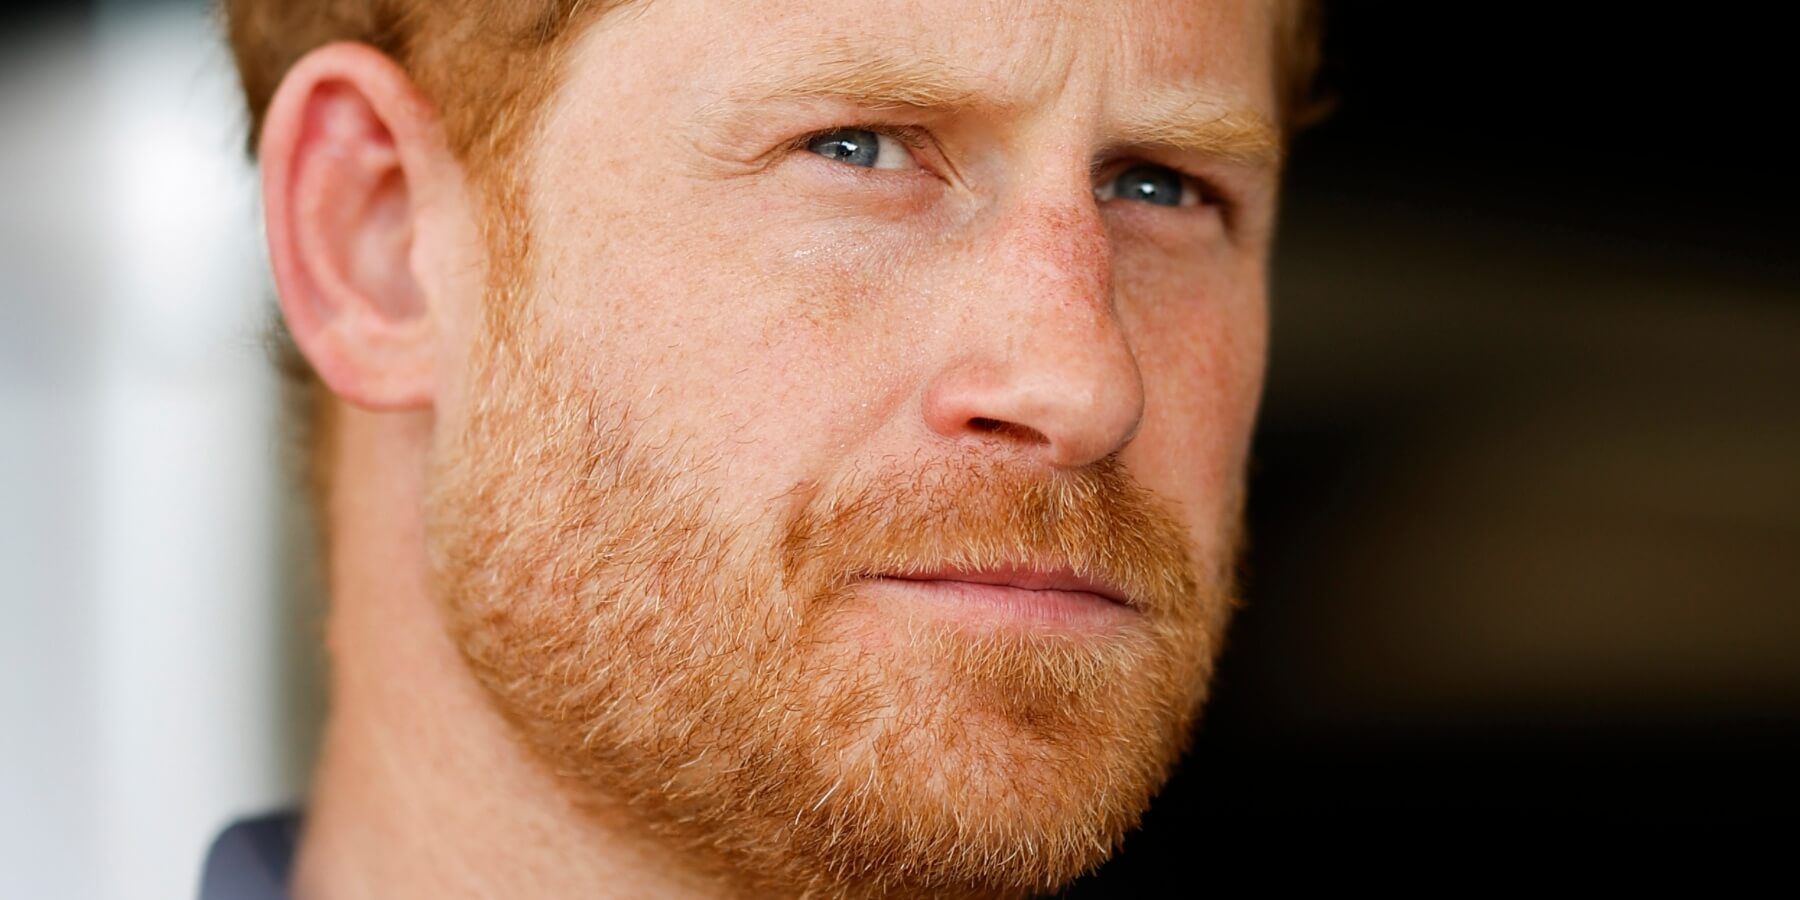 Prince Harry should distance himself from claims made in tell-all book 'Endgame' claims royal expert.